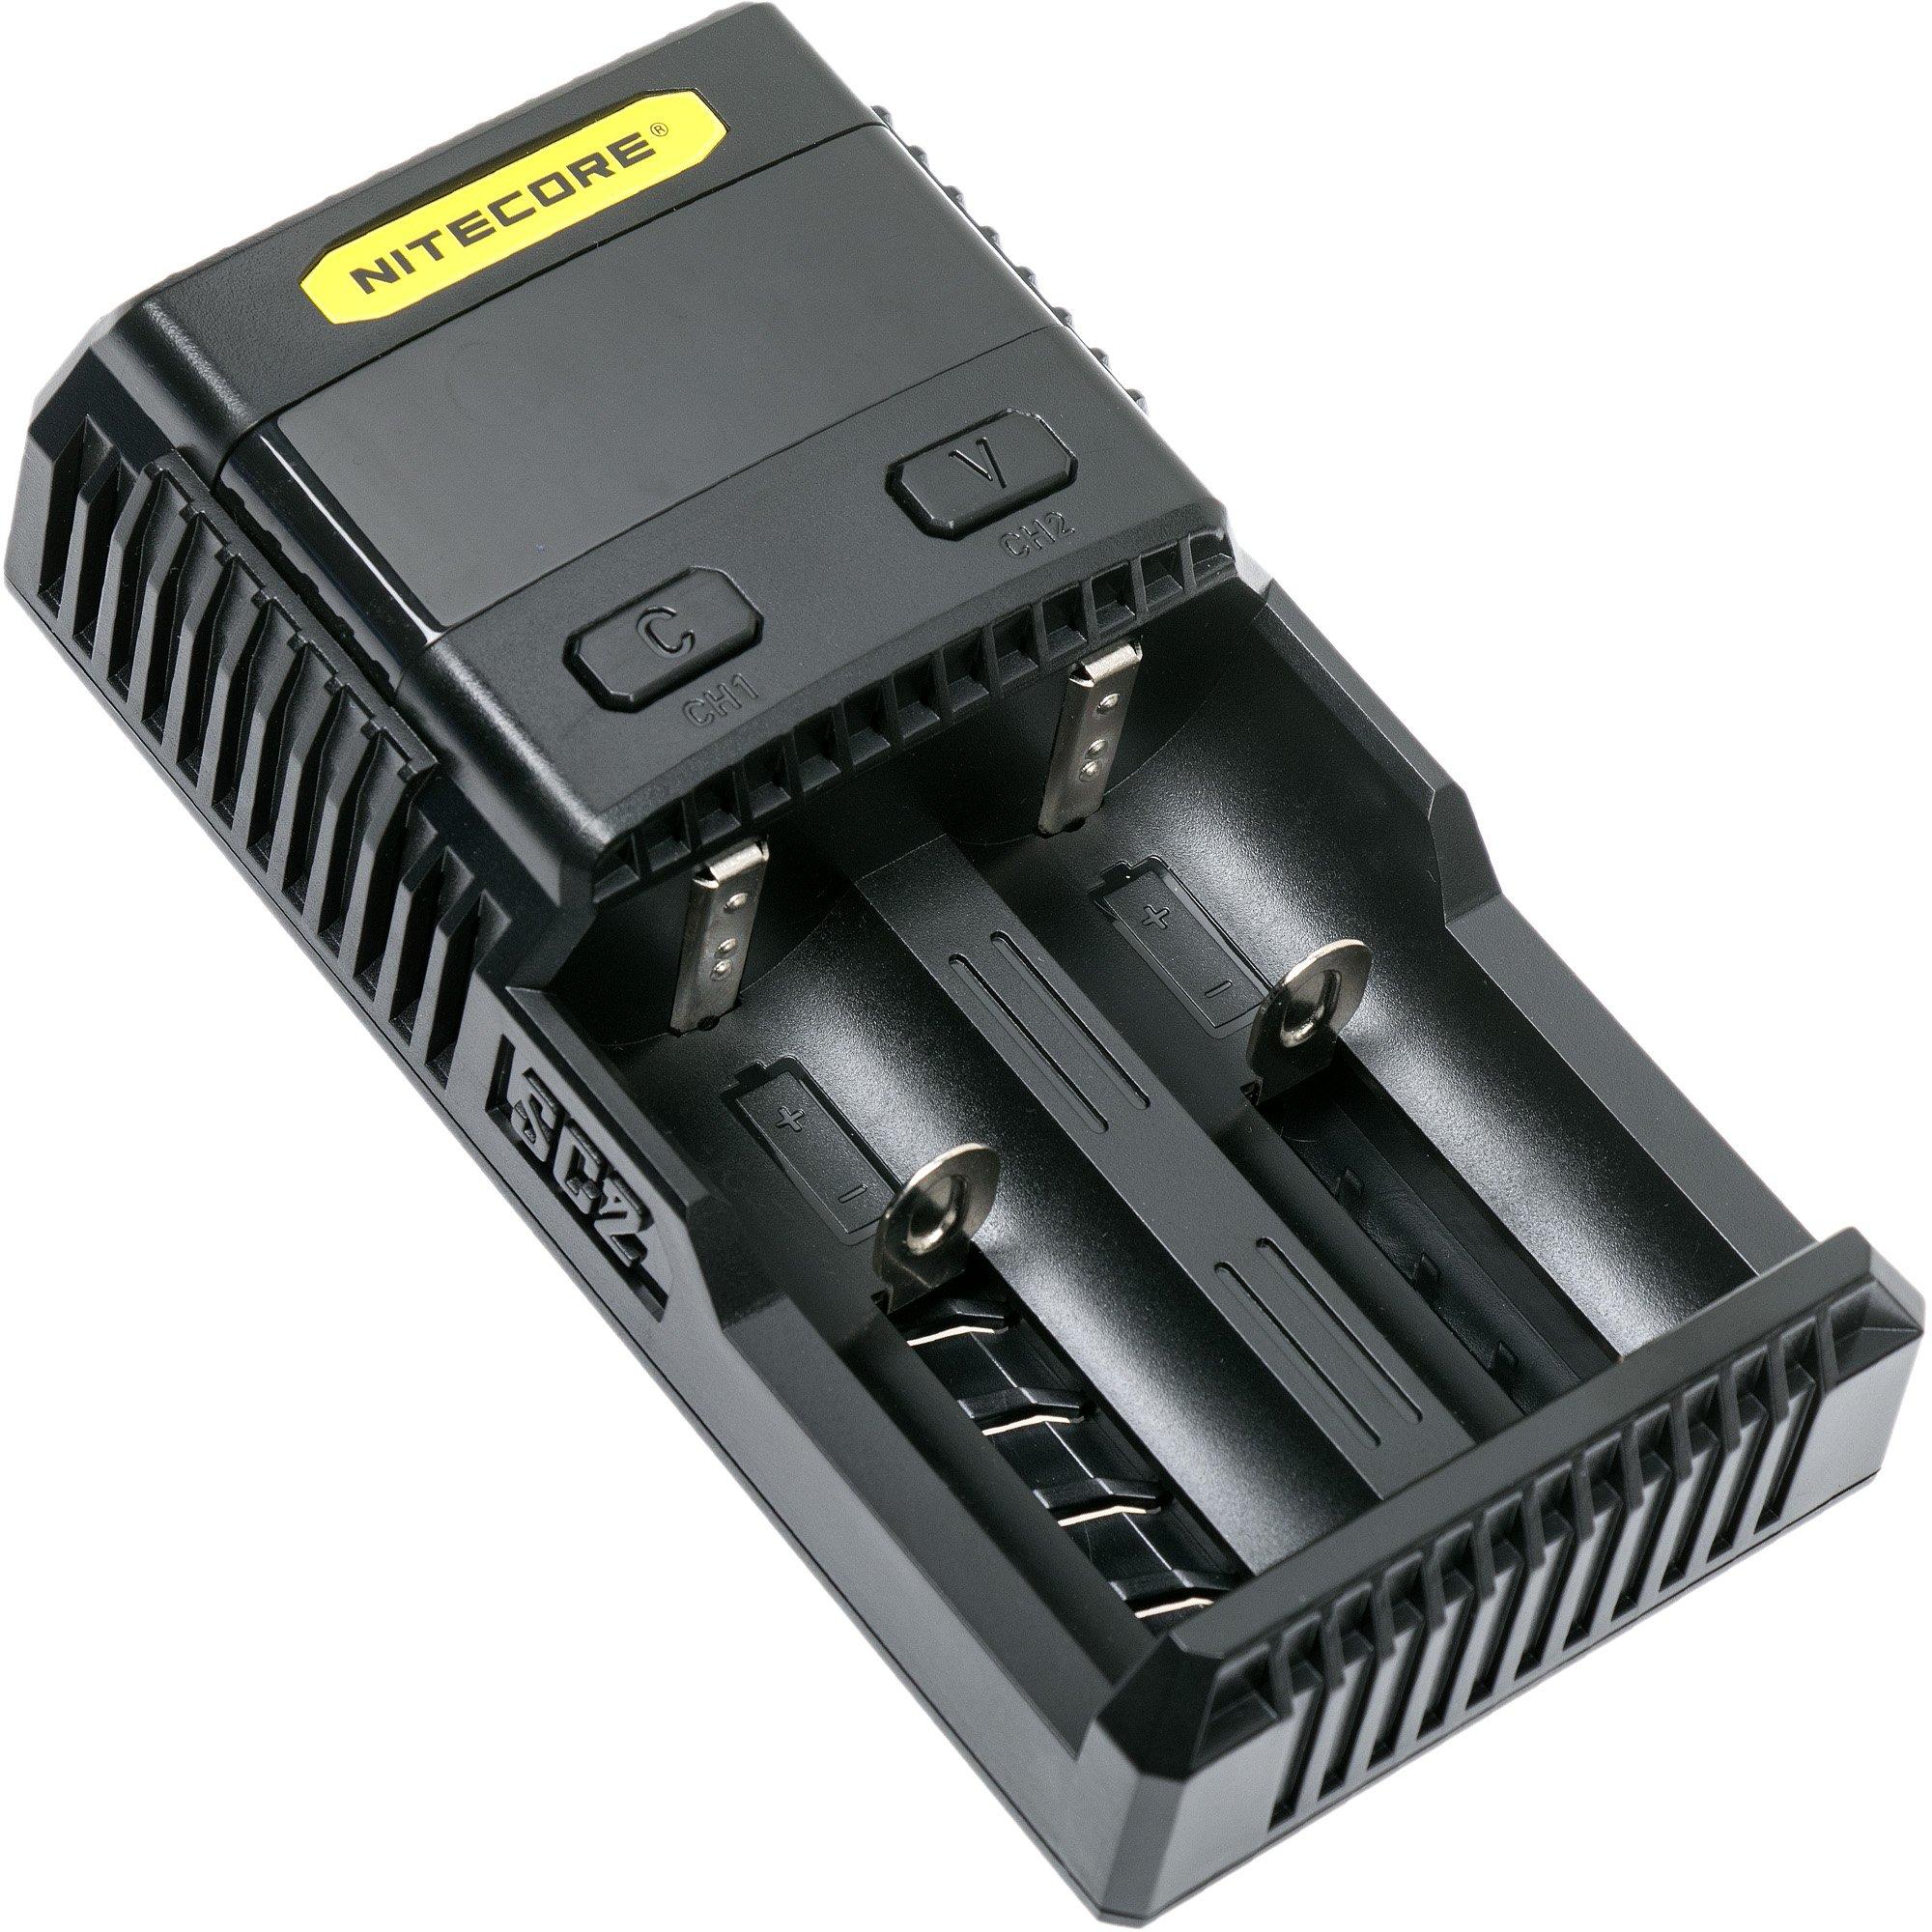 Nitecore UM2 Digital Battery Charger - Fast Charging & Safety Features